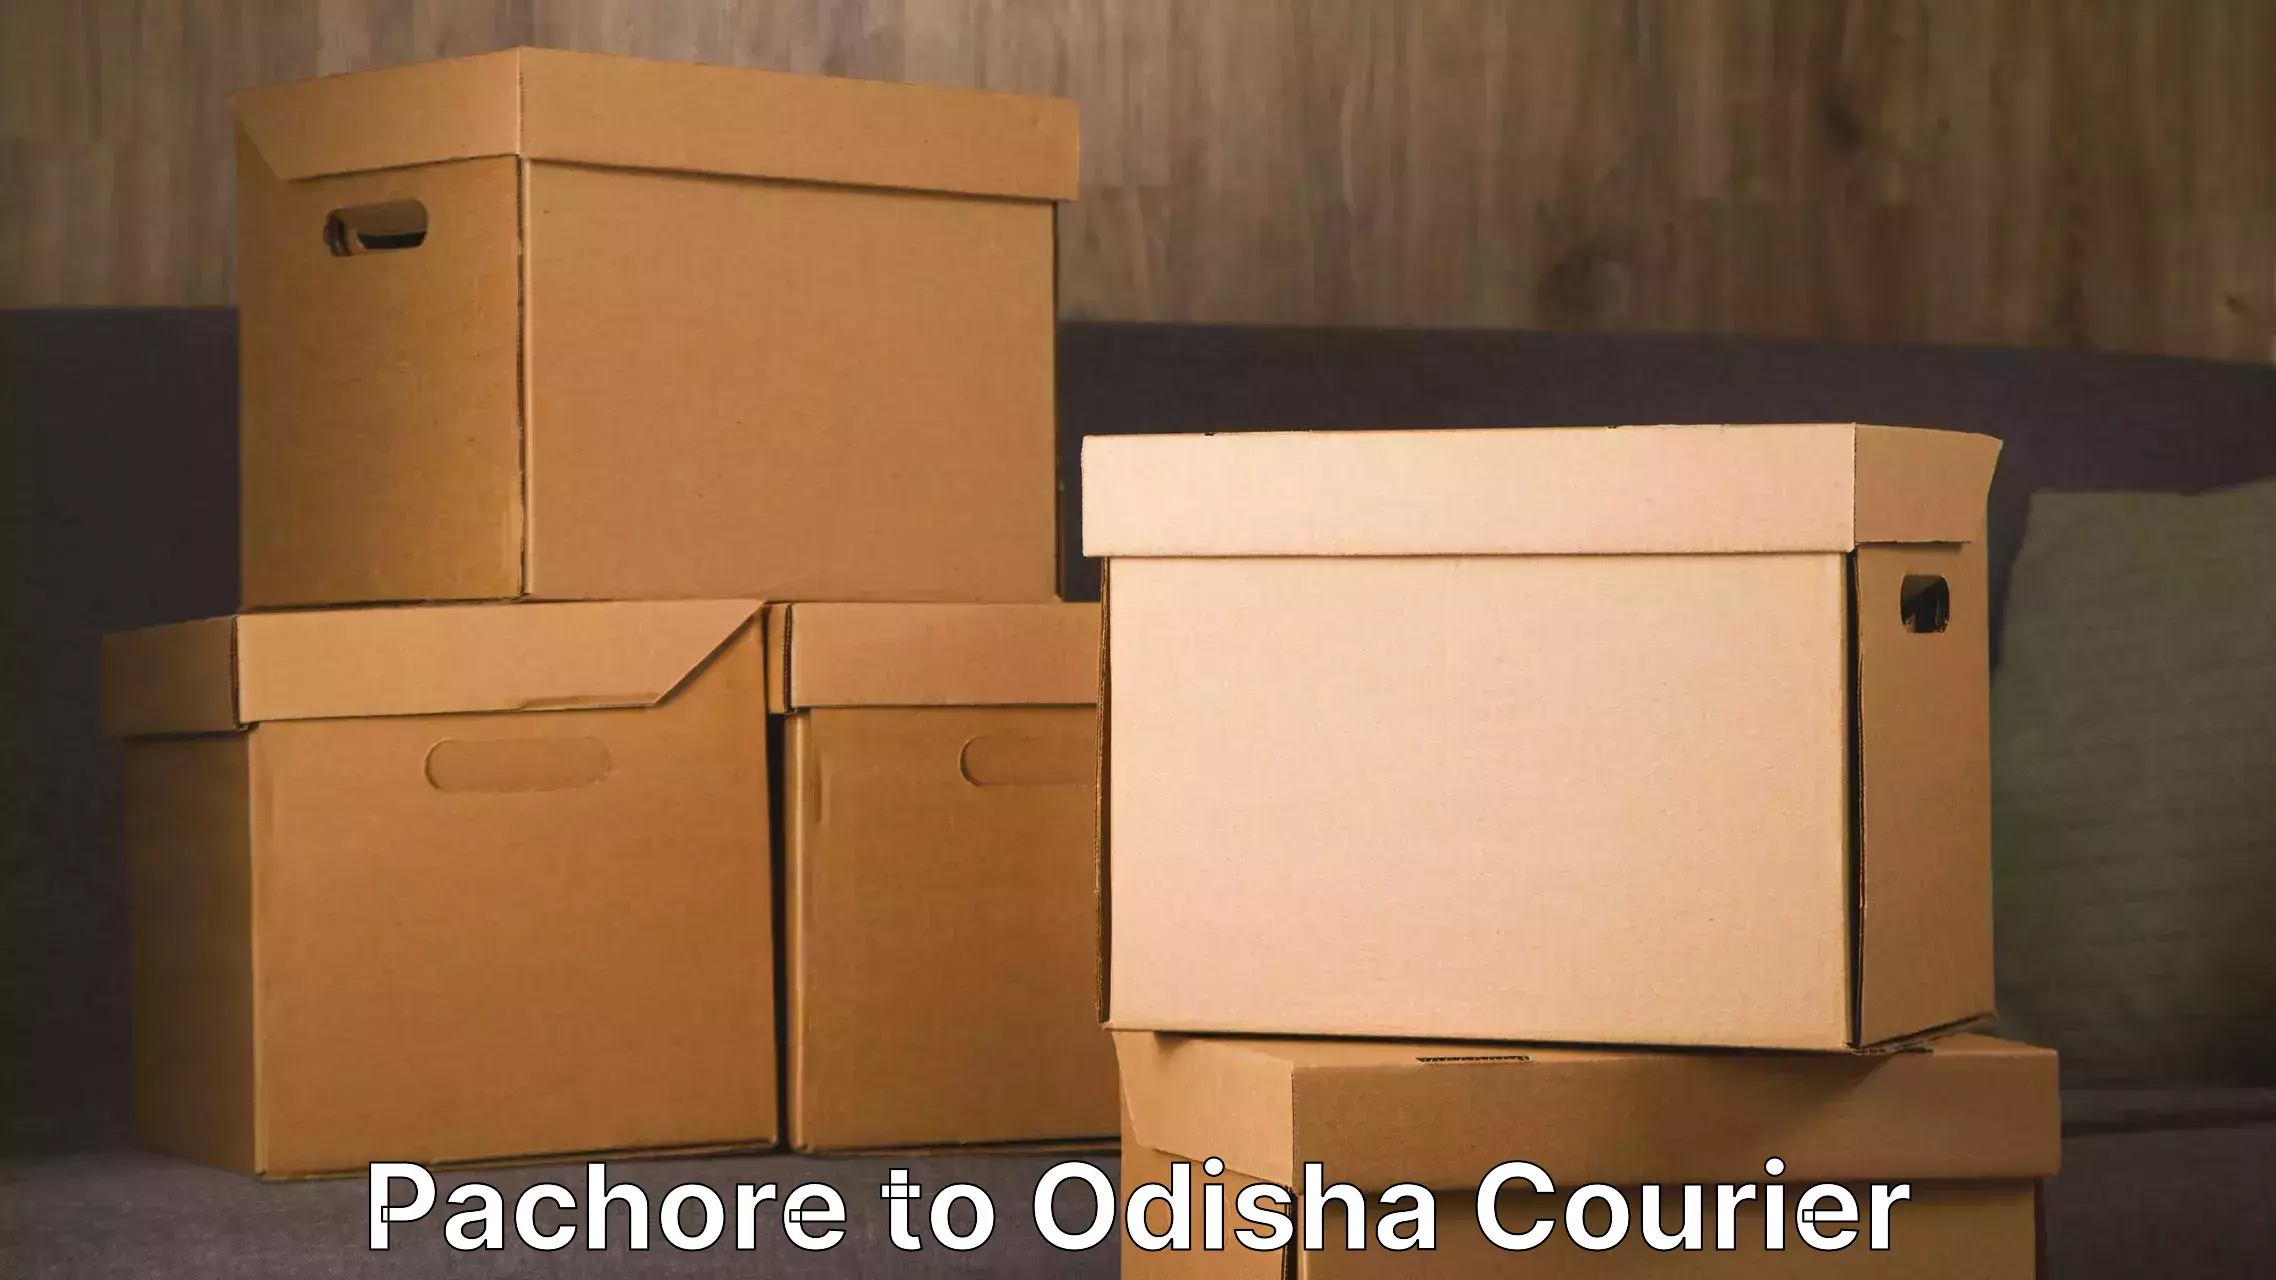 Furniture relocation experts Pachore to Odisha